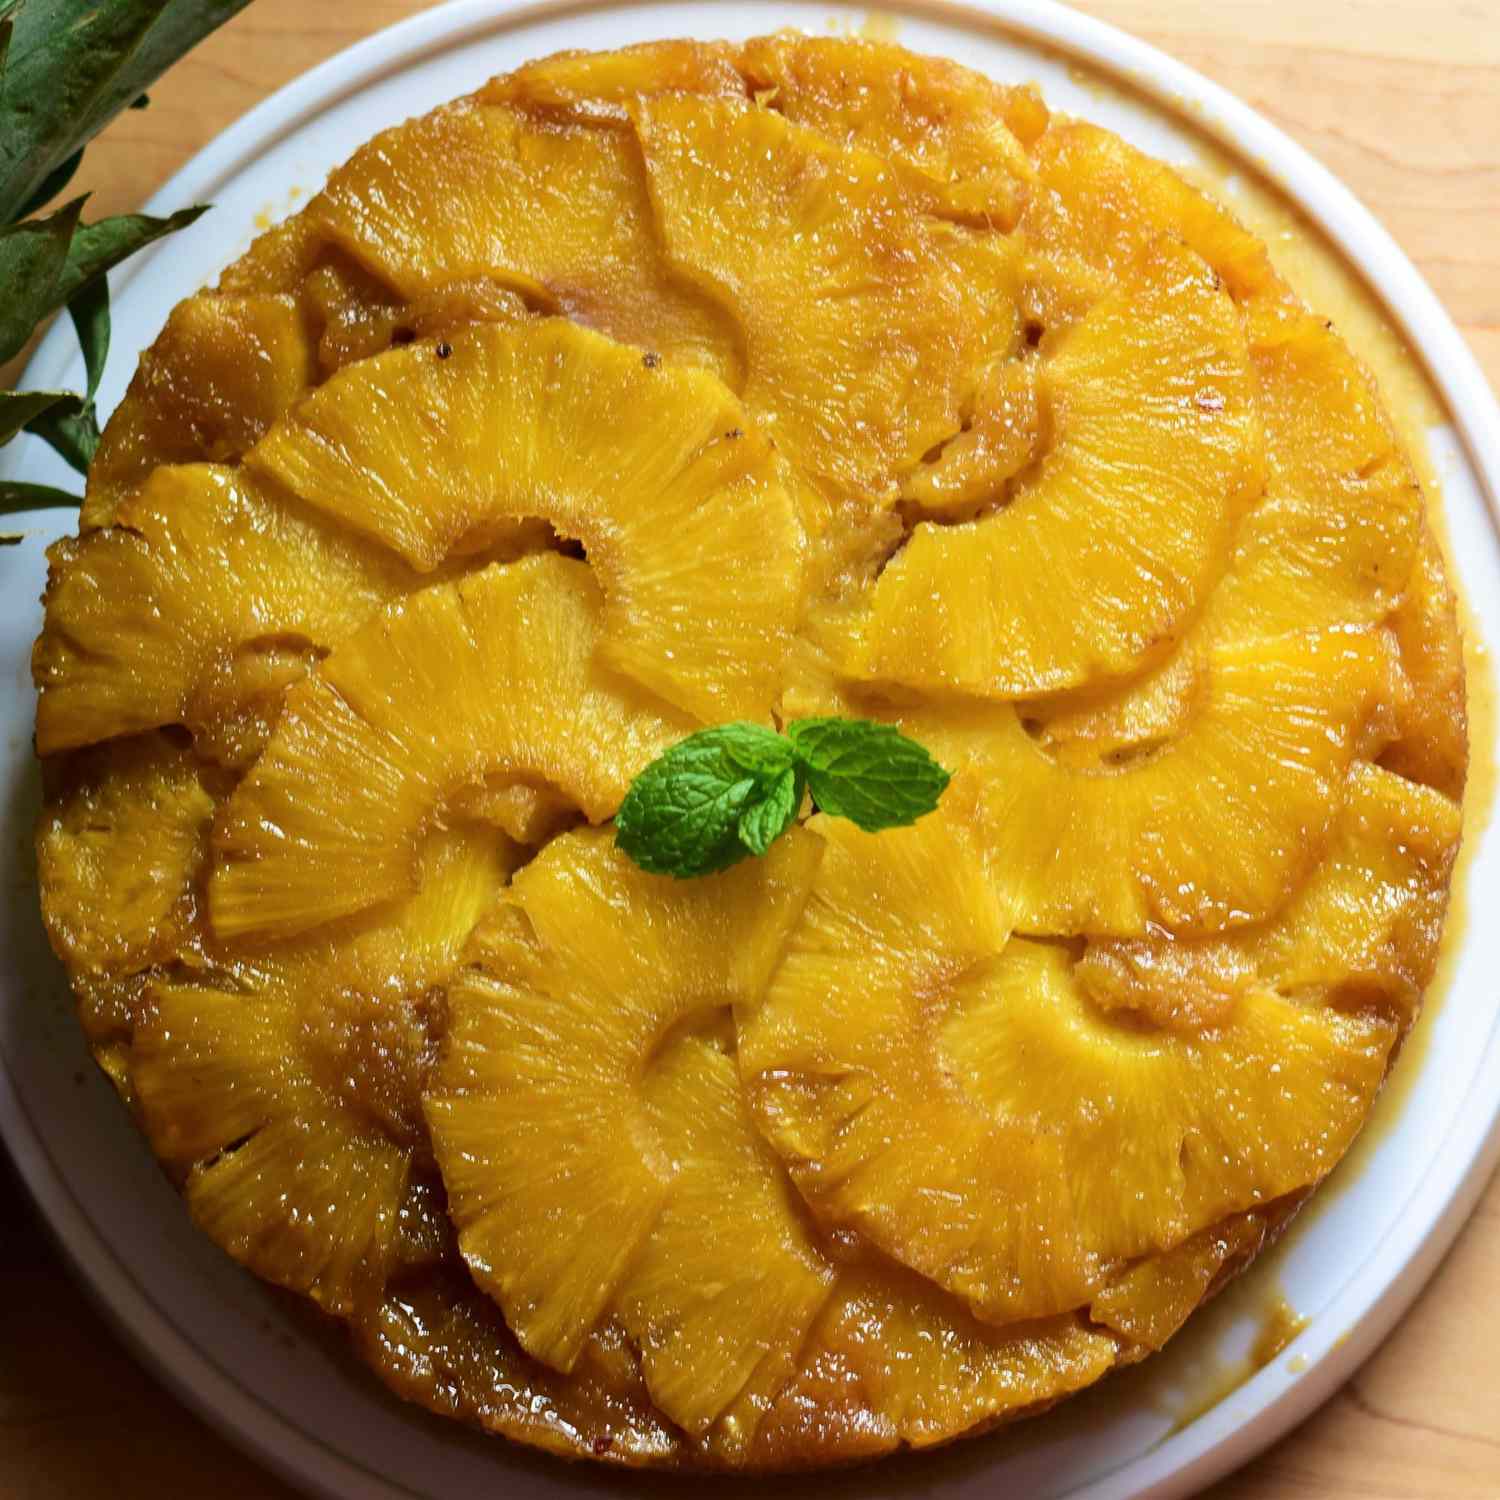 pineapple upside down cake with ricotta